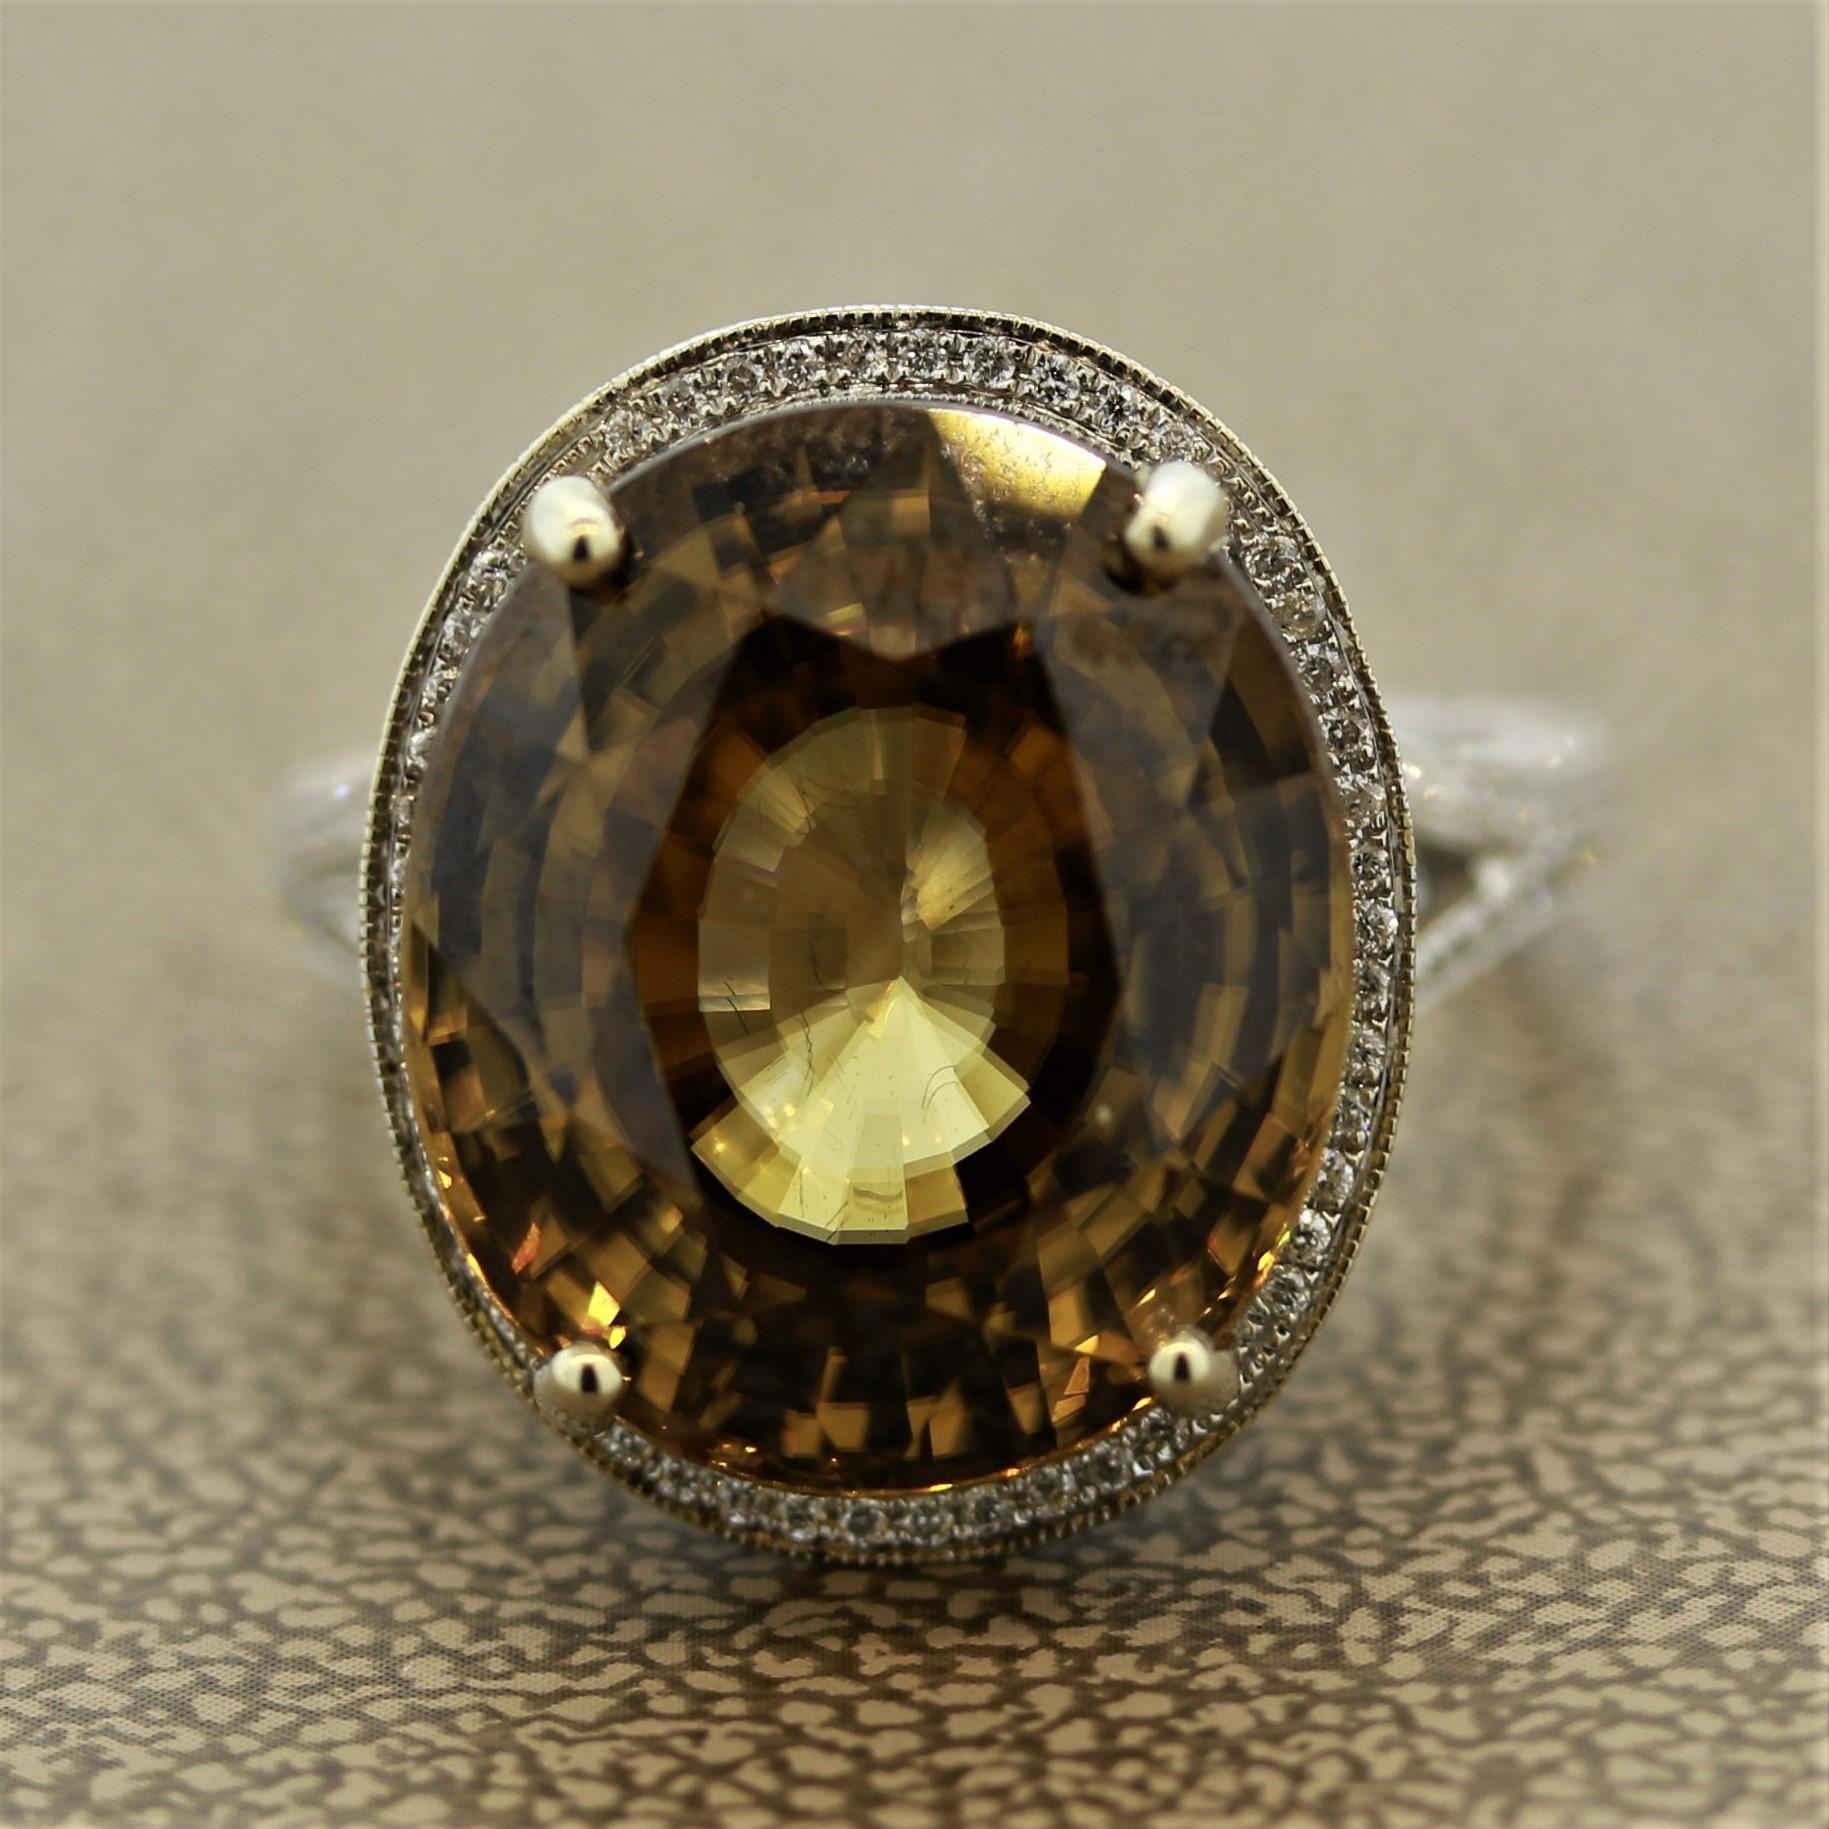 An underappreciated gemstone! Zircon is a natural stone found around the world, mainly in Africa, and has similar refractive index as diamond which gives it fantastic brilliance and fire. This honey colored zircon weighs 22.40 carats and is cut as